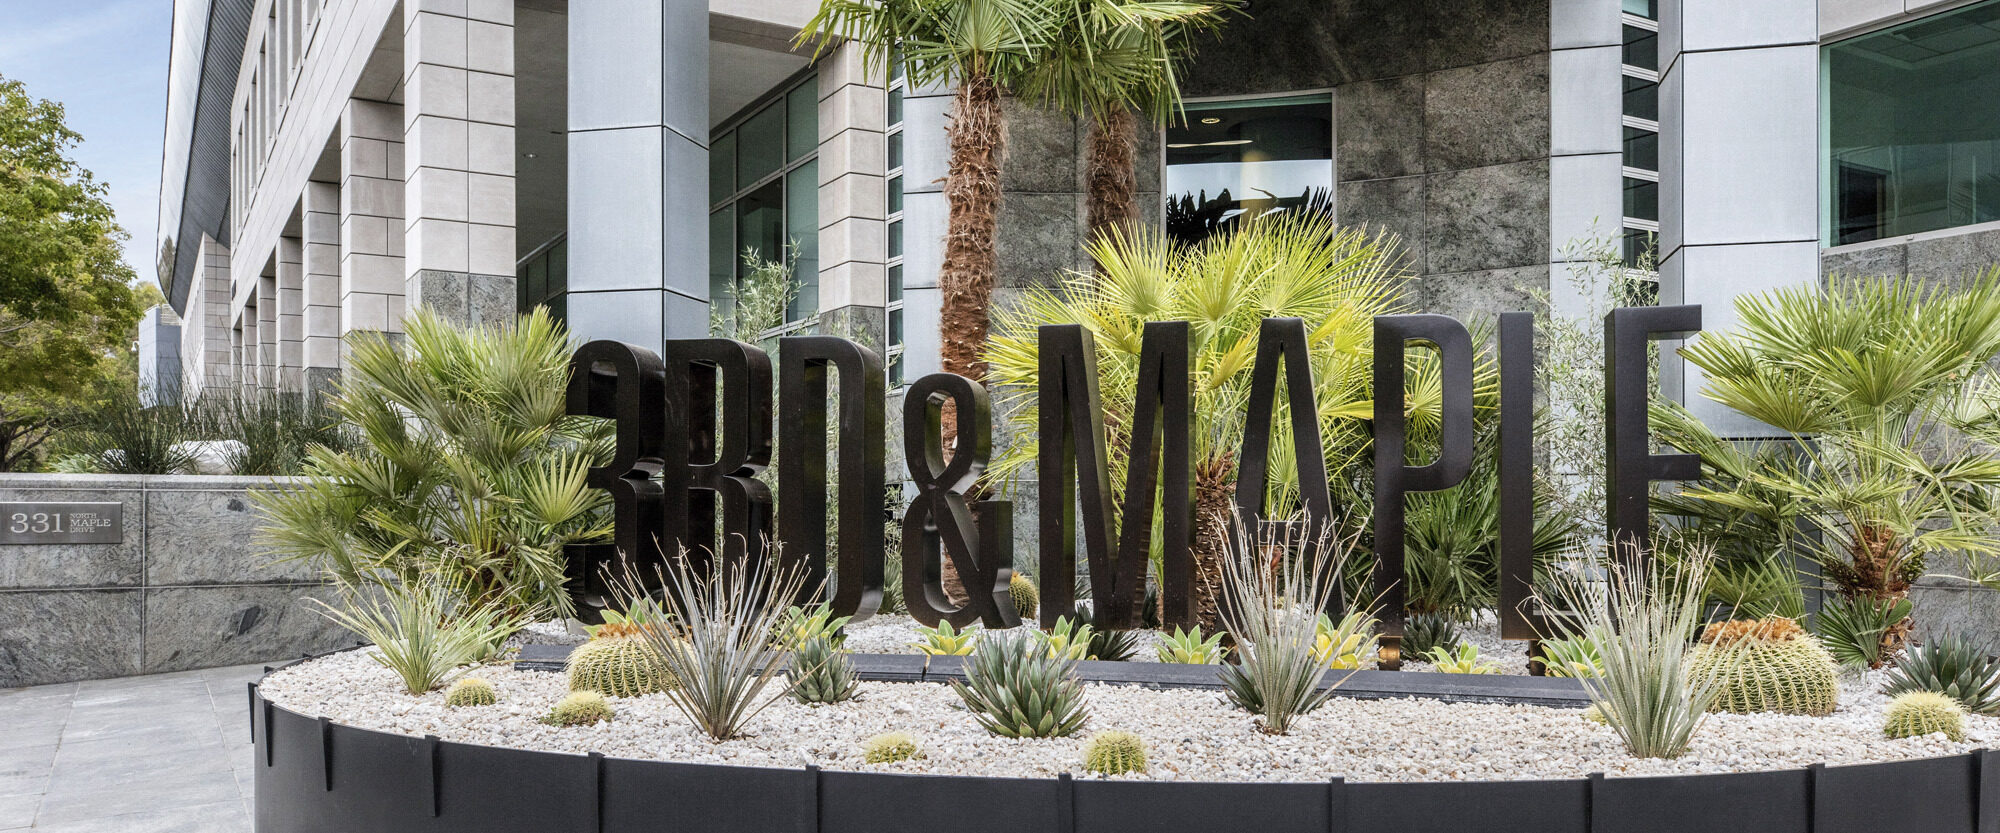 Modern commercial landscape featuring bold 3D letter signage amidst an array of desert landscaping elements, such as agave and yucca plants, set against a building with reflective glass and granite finishes.